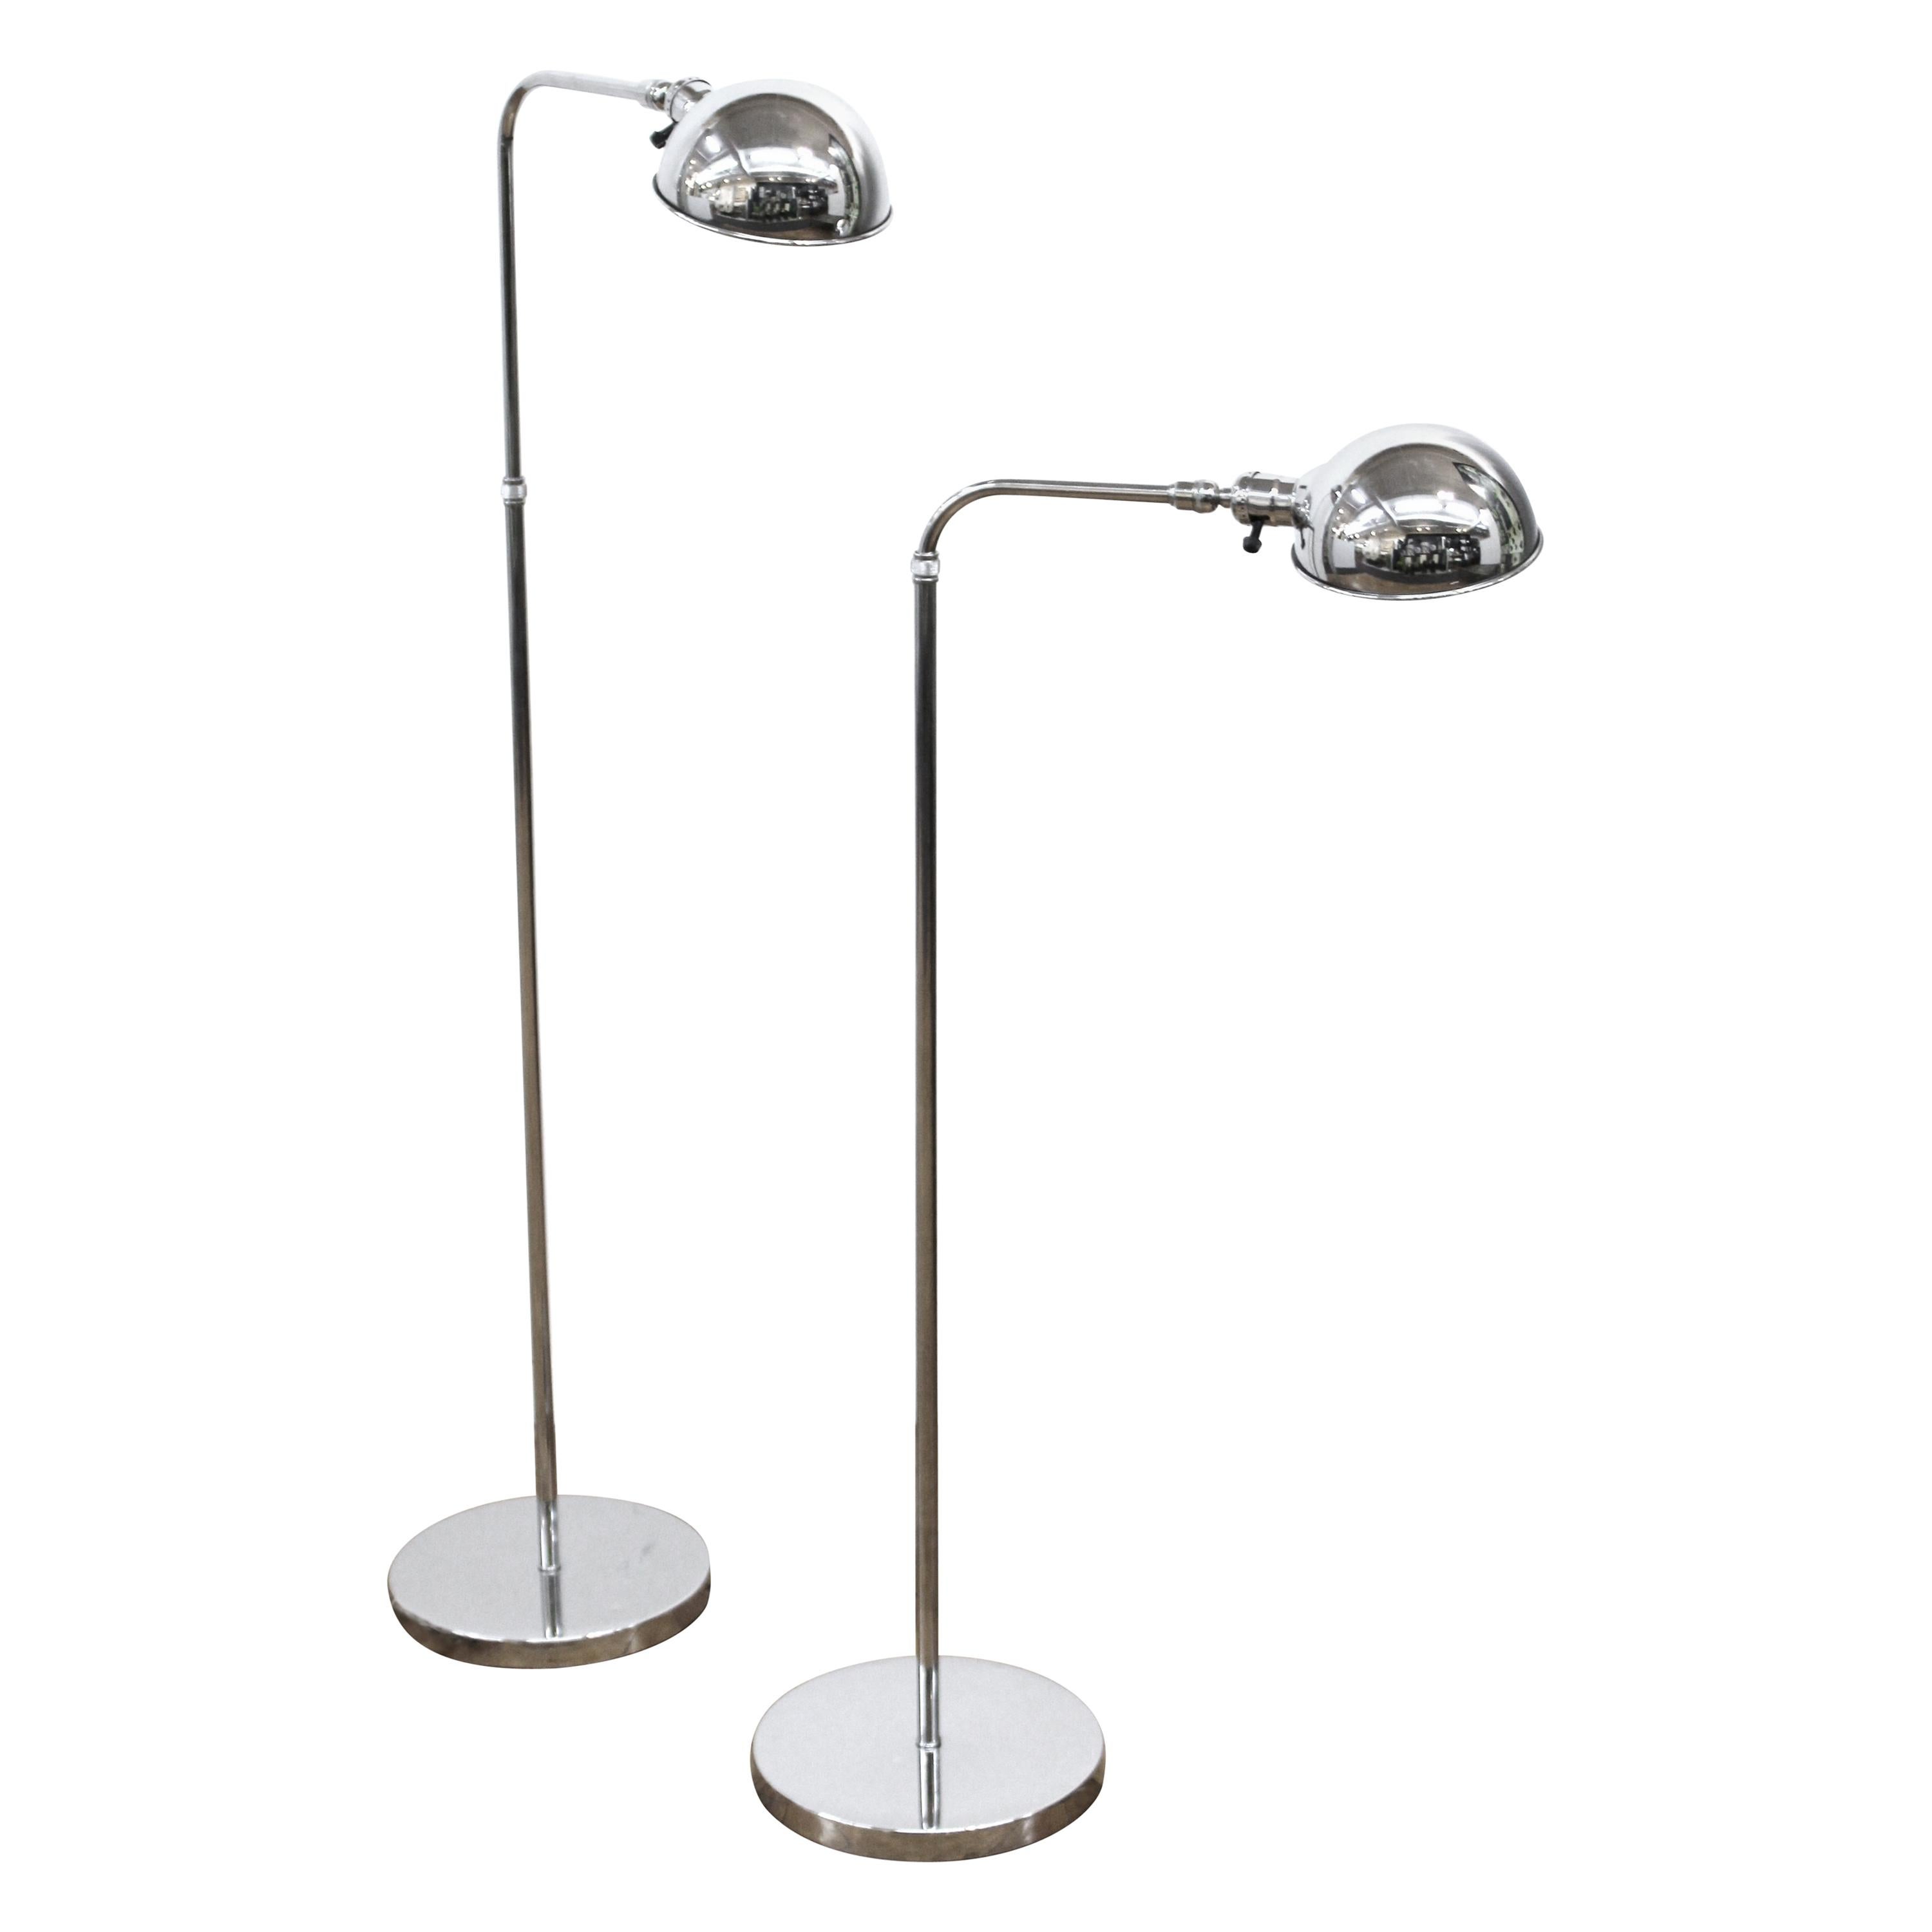 Modern Metal Floor Reading Lamps with Adjustable Height